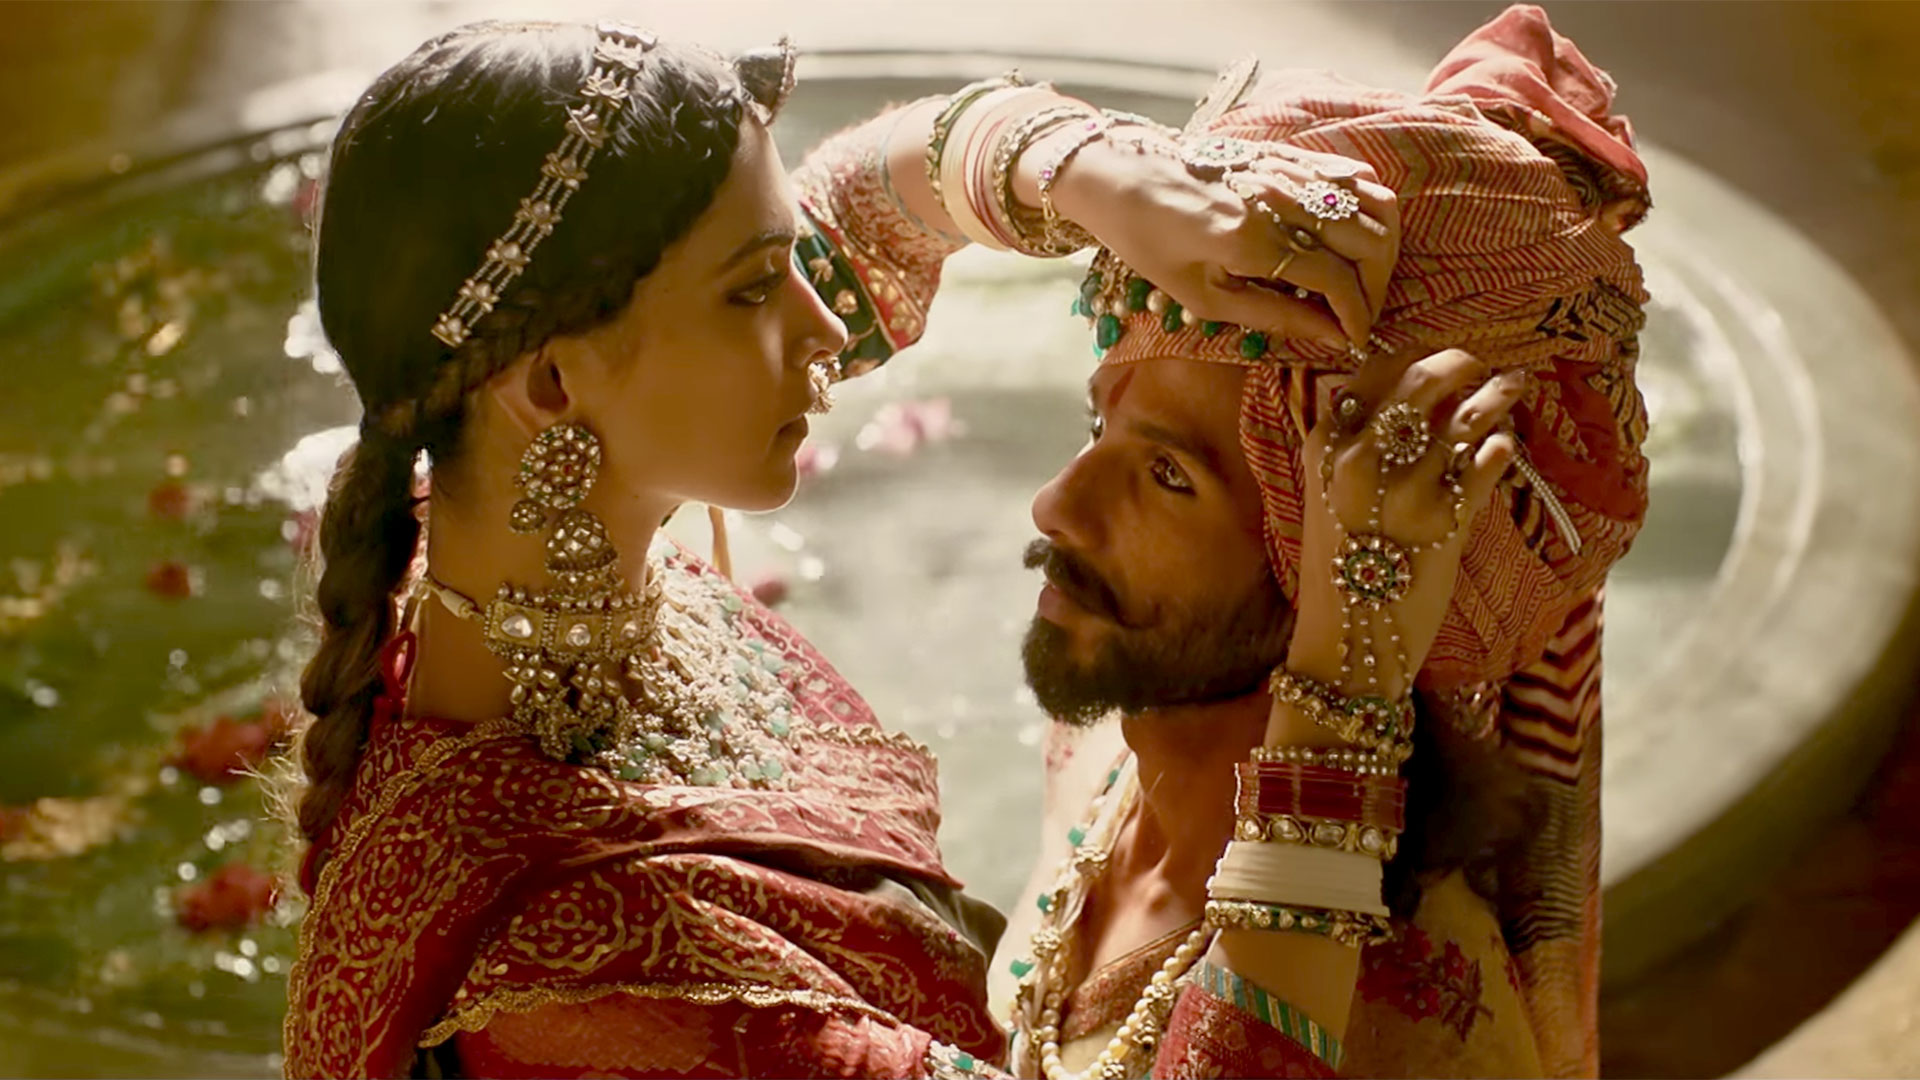 Well, it seems that ongoing discussion over Padmavati is not going to end anytime soon.